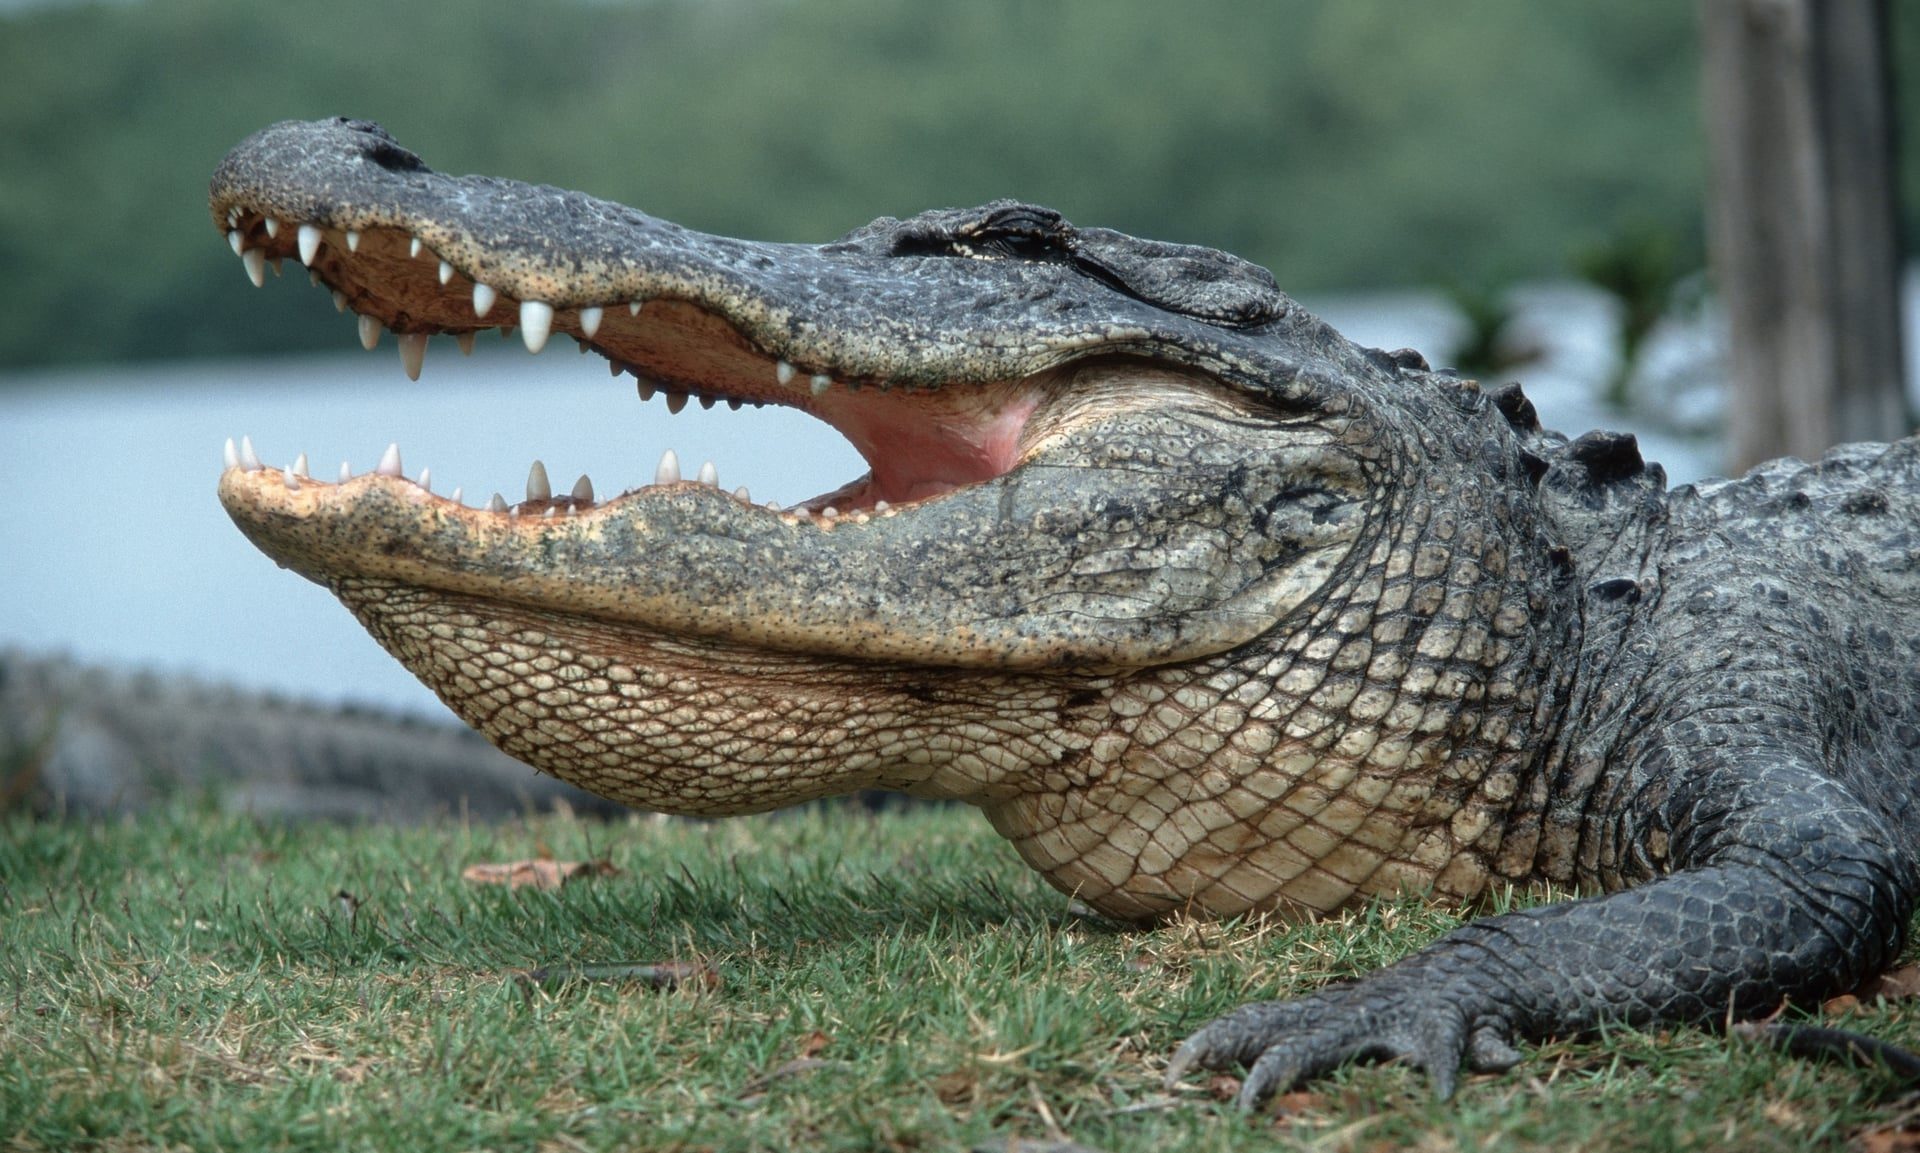 The 8ft alligator was later found and euthanized, Sam Chappalear of the South Carolina Department of Natural Resources told the Island Packet newspaper.